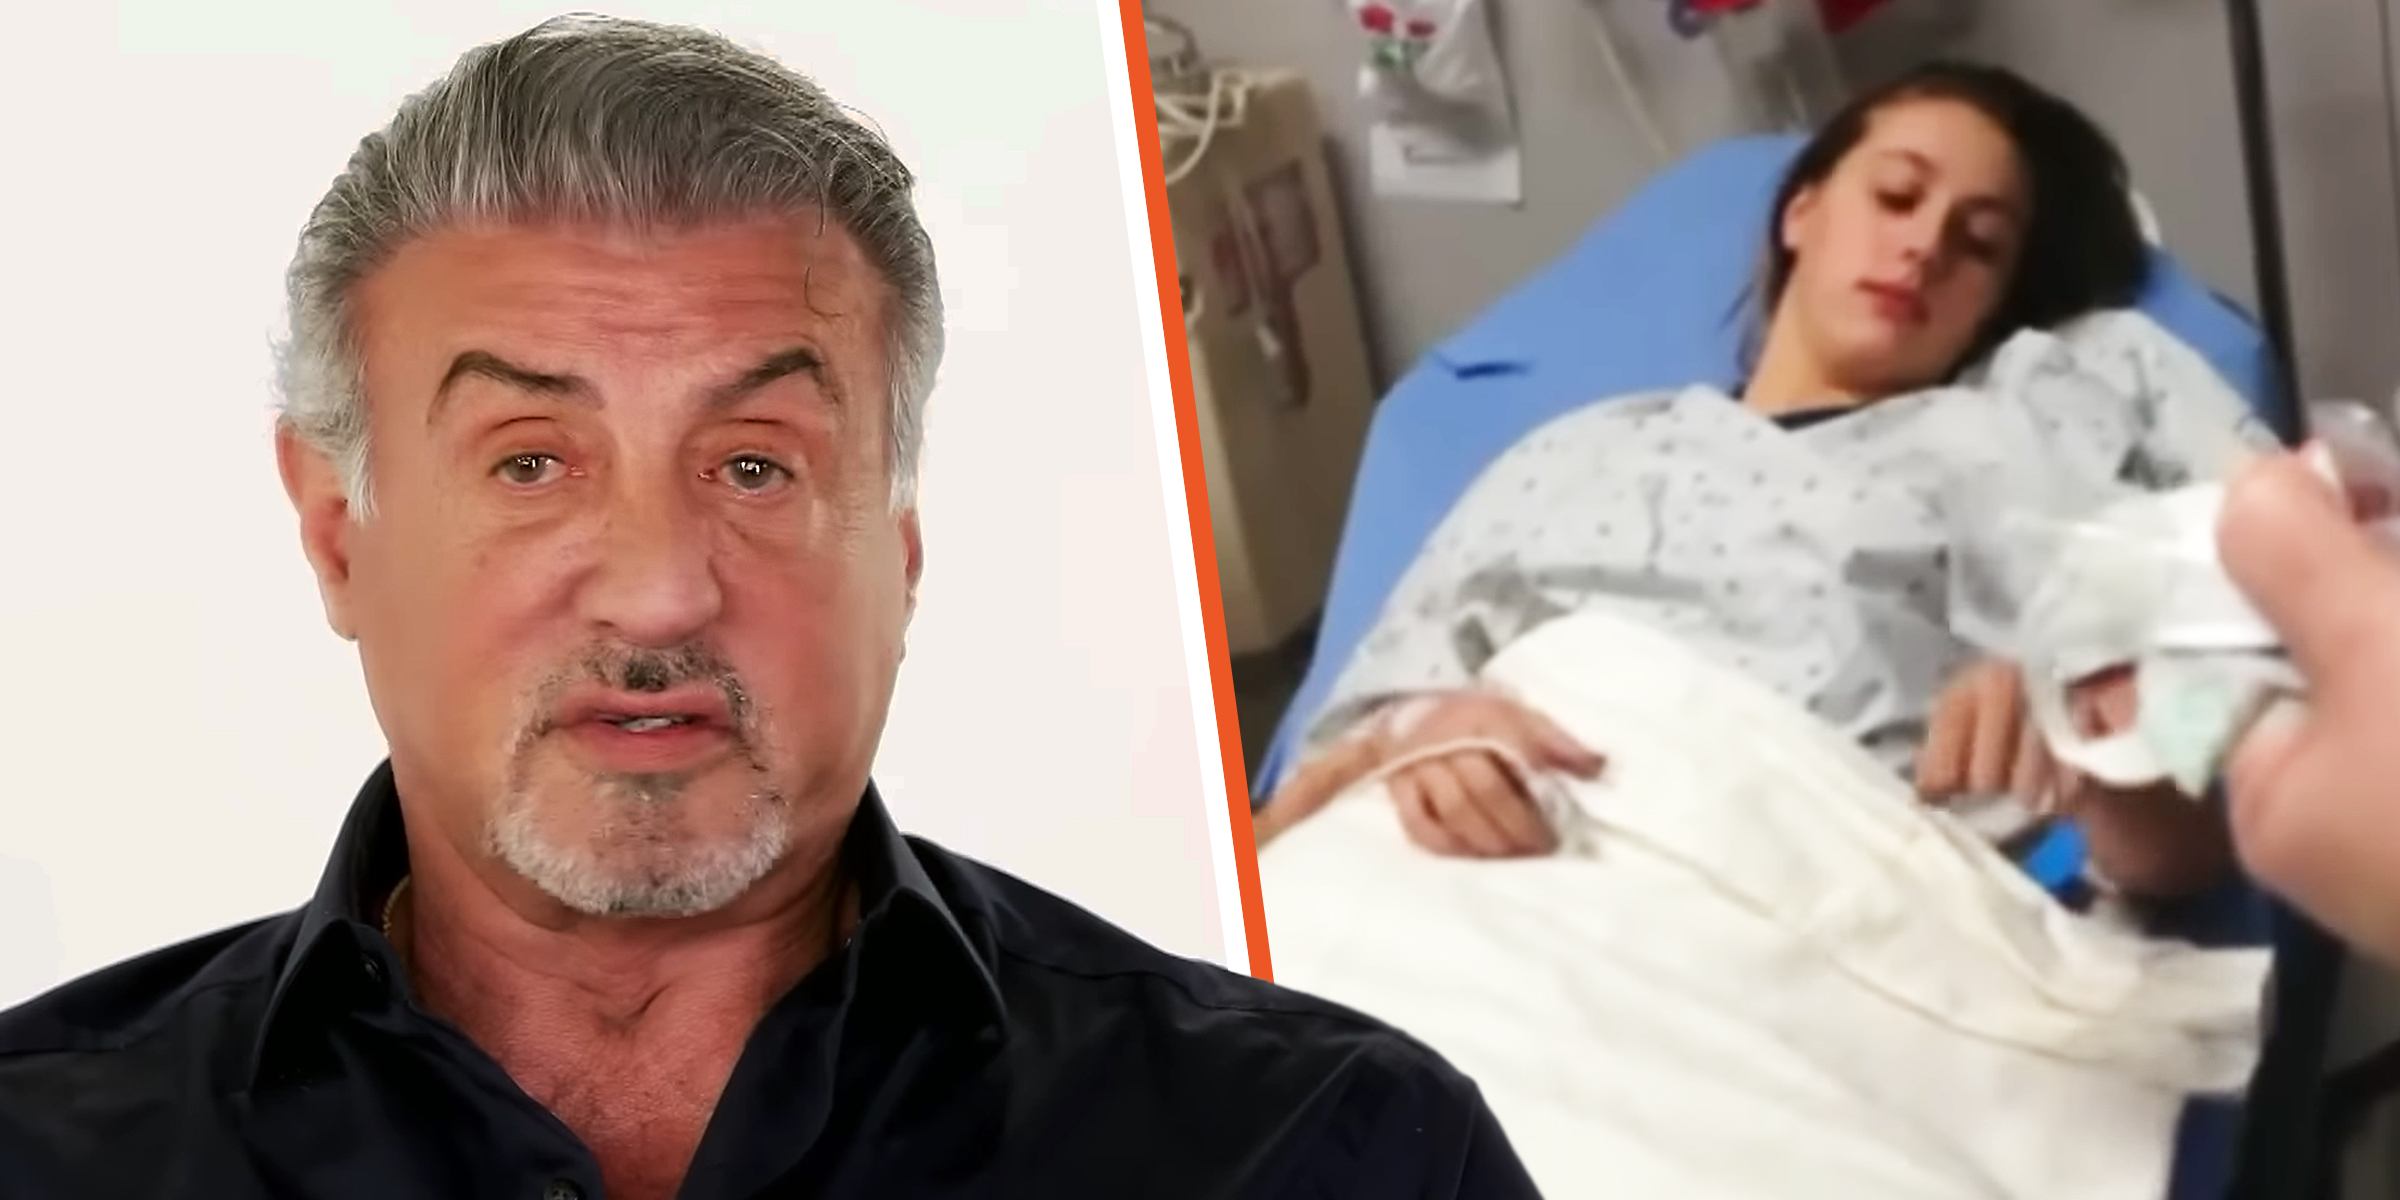 Sylvester Stallone | Sophia Stallone | Source: youtube.com/AccessHollywood